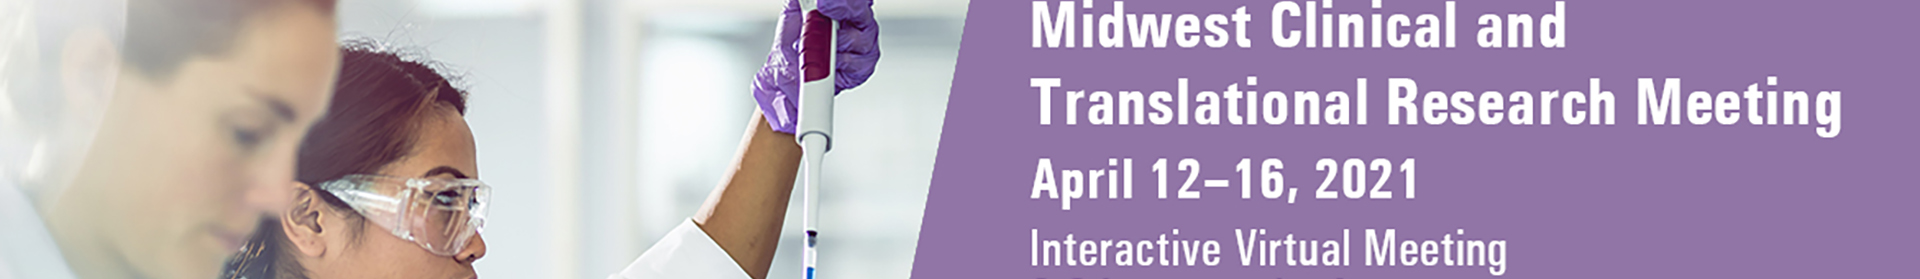 2021 Midwest Clinical and Translational Research Meeting Event Banner